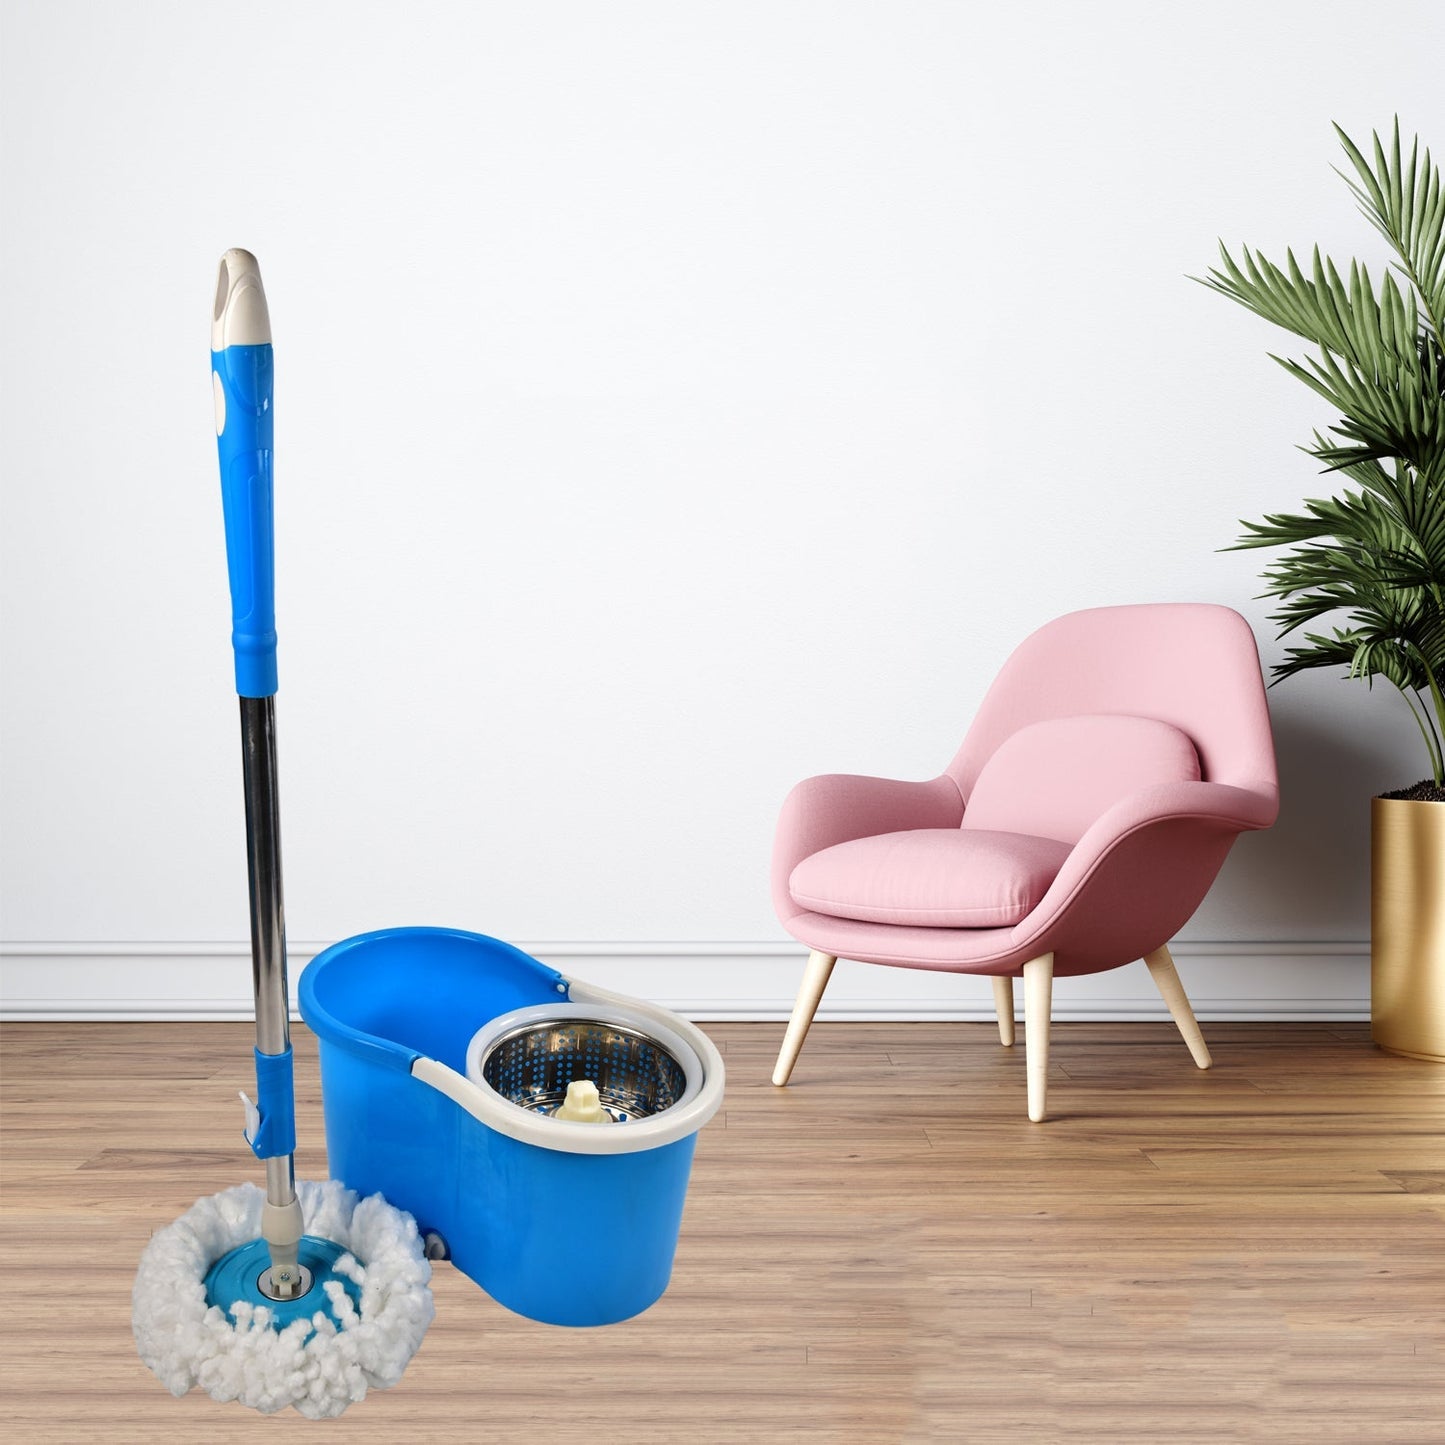 Spin Floor Cleaning Easy Advance Tech Bucket Mop and Rotating Steel Pole Head with 2 Microfiber Refill Heads  for Household Floor Cleaning